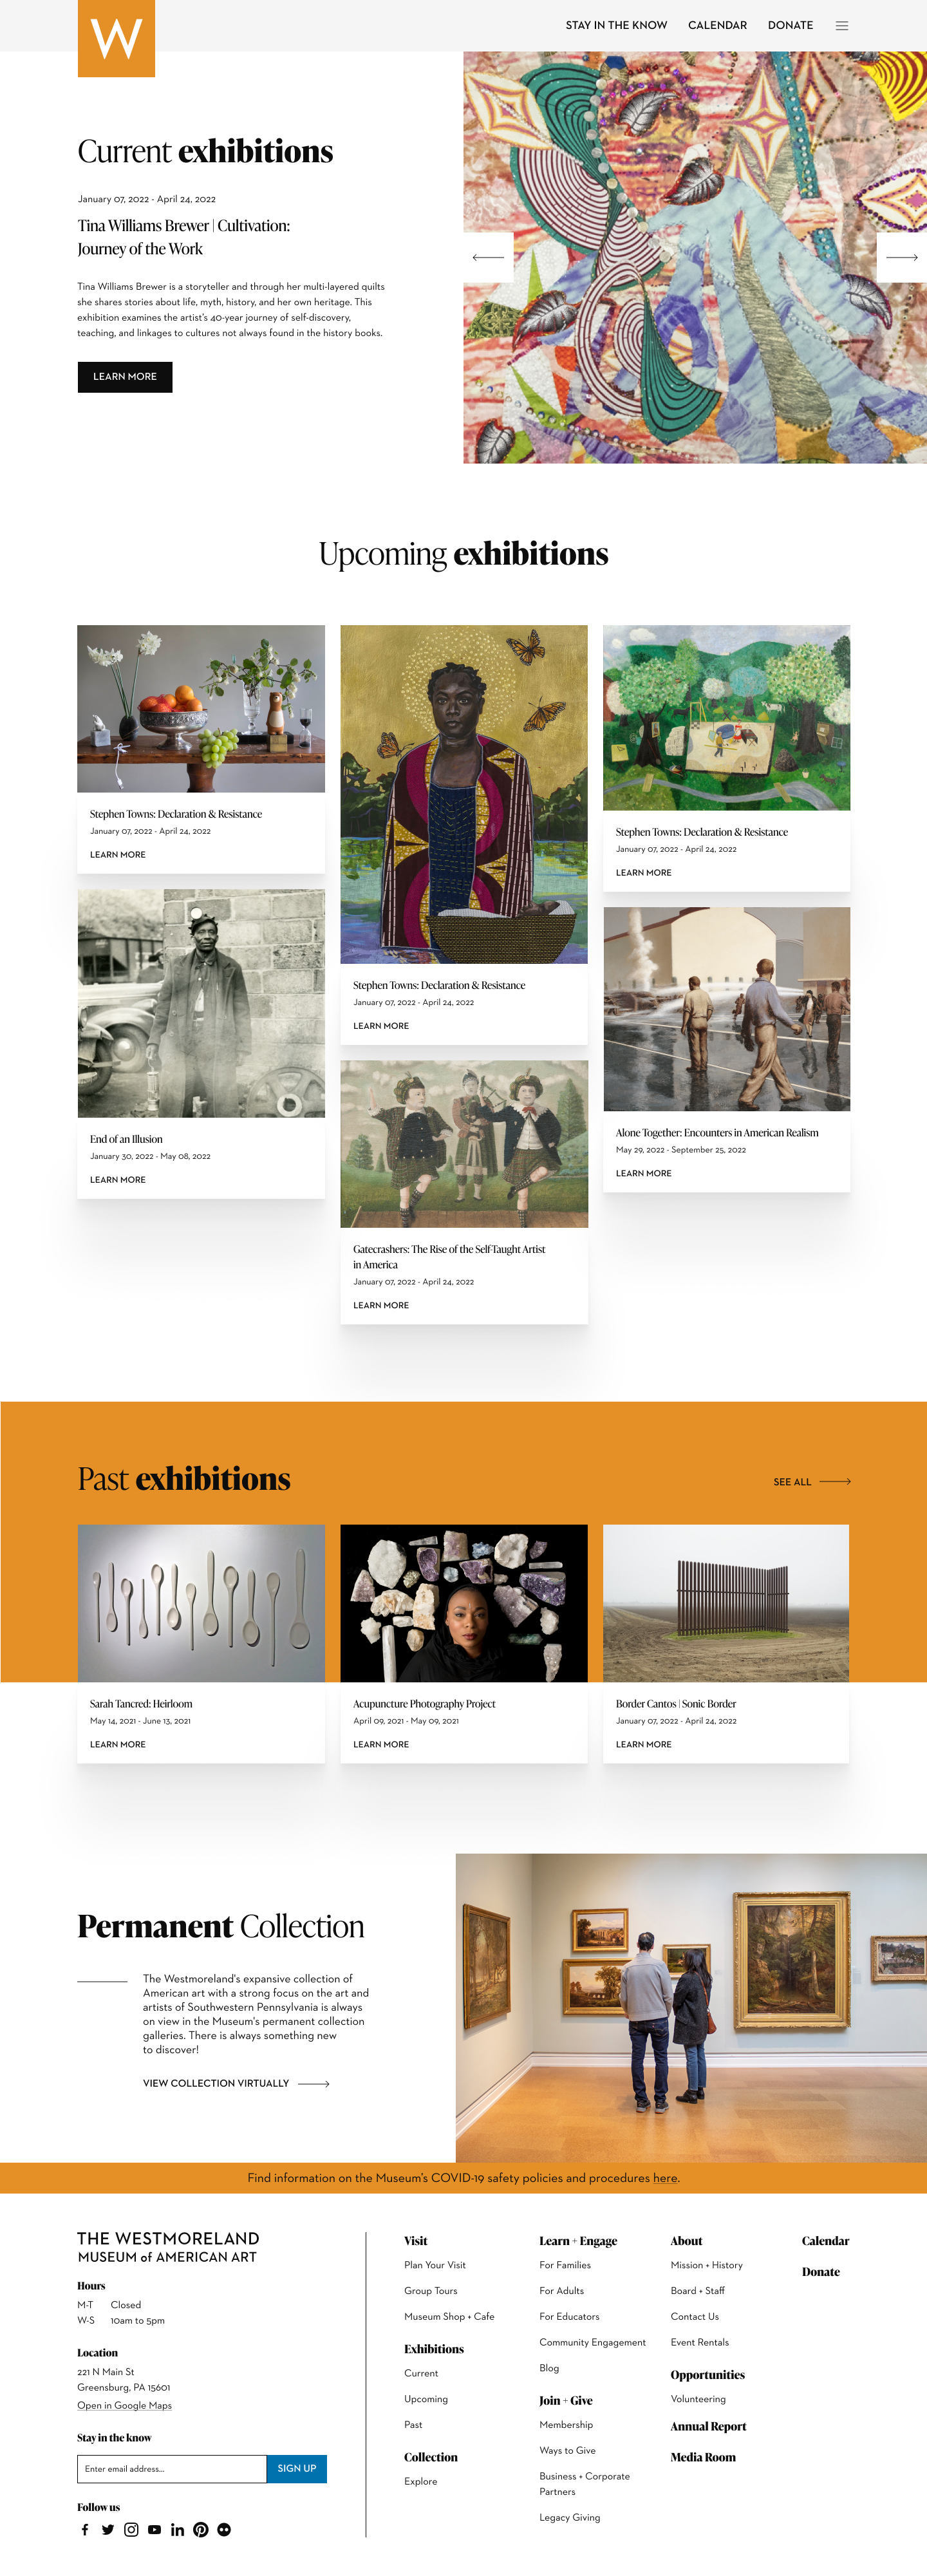 Listing of current exhibitions